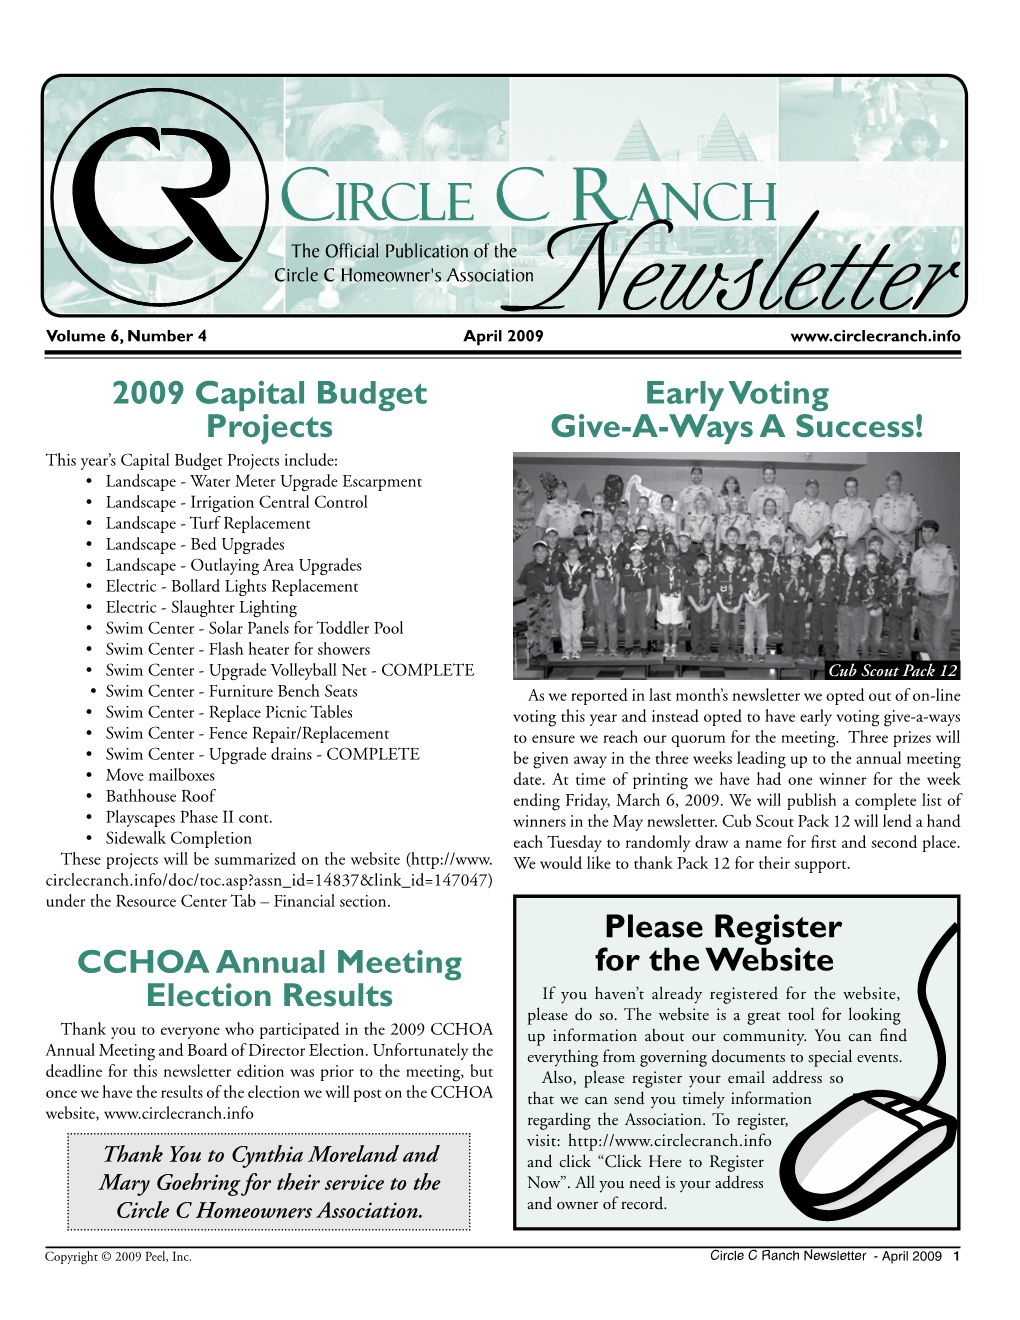 CCHOA Clubs & Announce. Continued